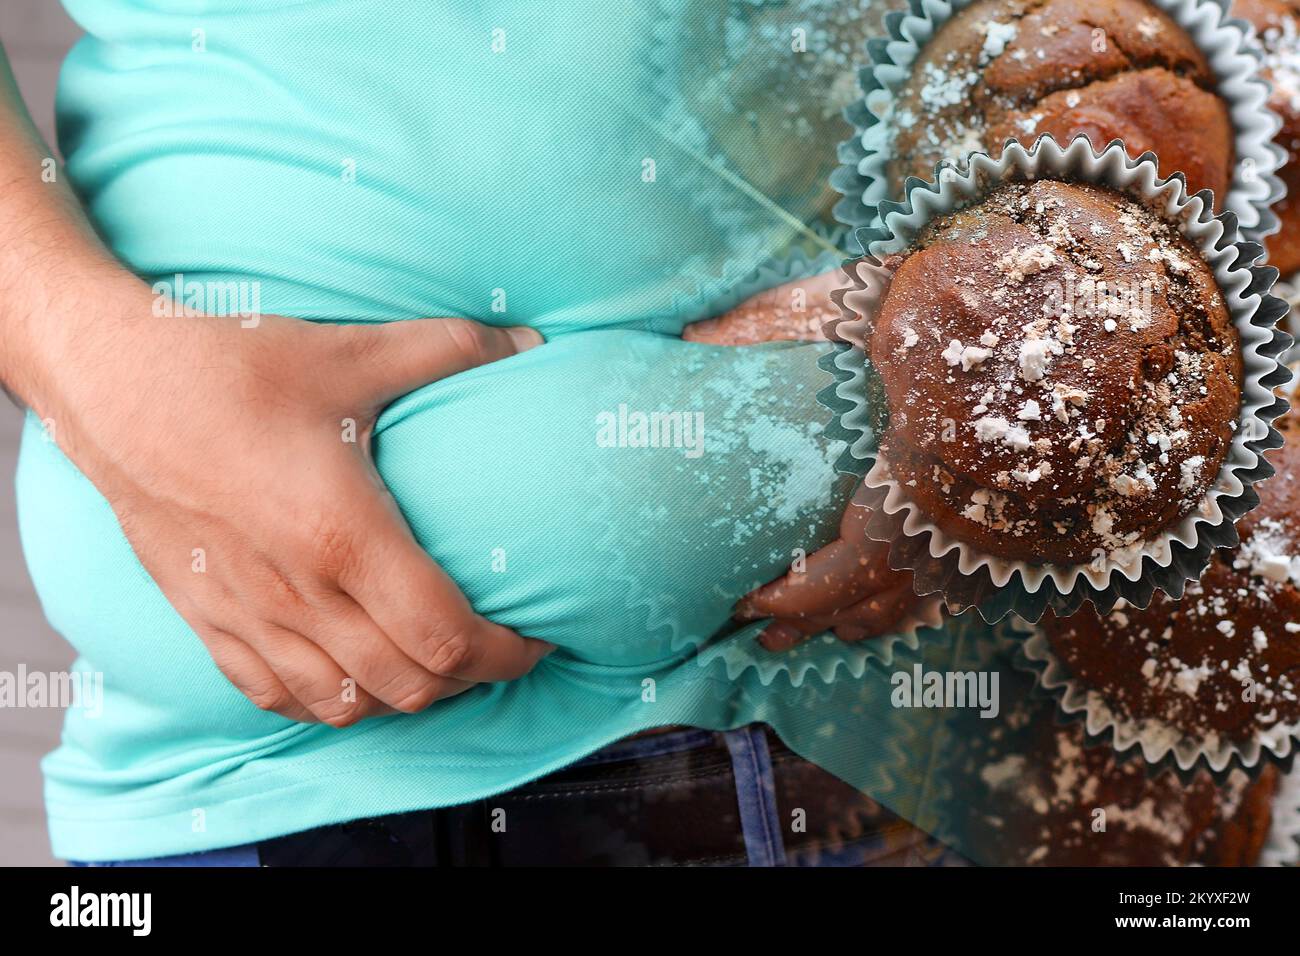 Obesity and junk food. Man clutching his belly fat and chocolate cupcakes. Stock Photo